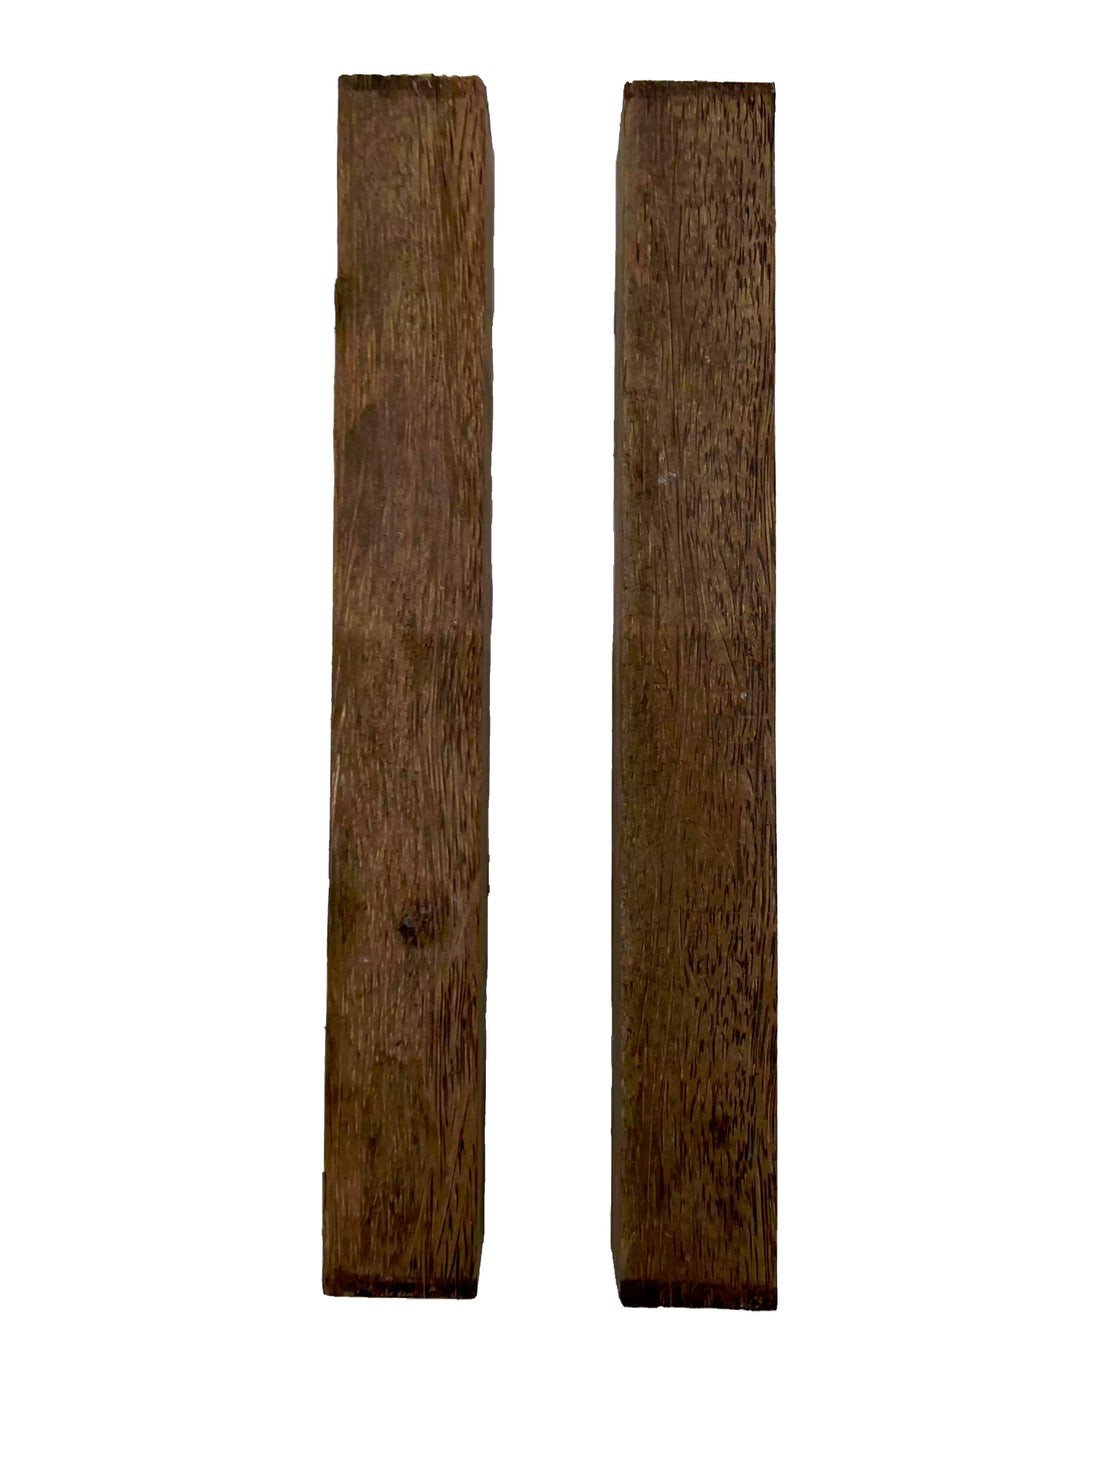 Pack of 2, Red Palm Hardwood Turning Square Wood Blanks 12&quot; x 1-1/2&quot; x 1-1/2&quot; 